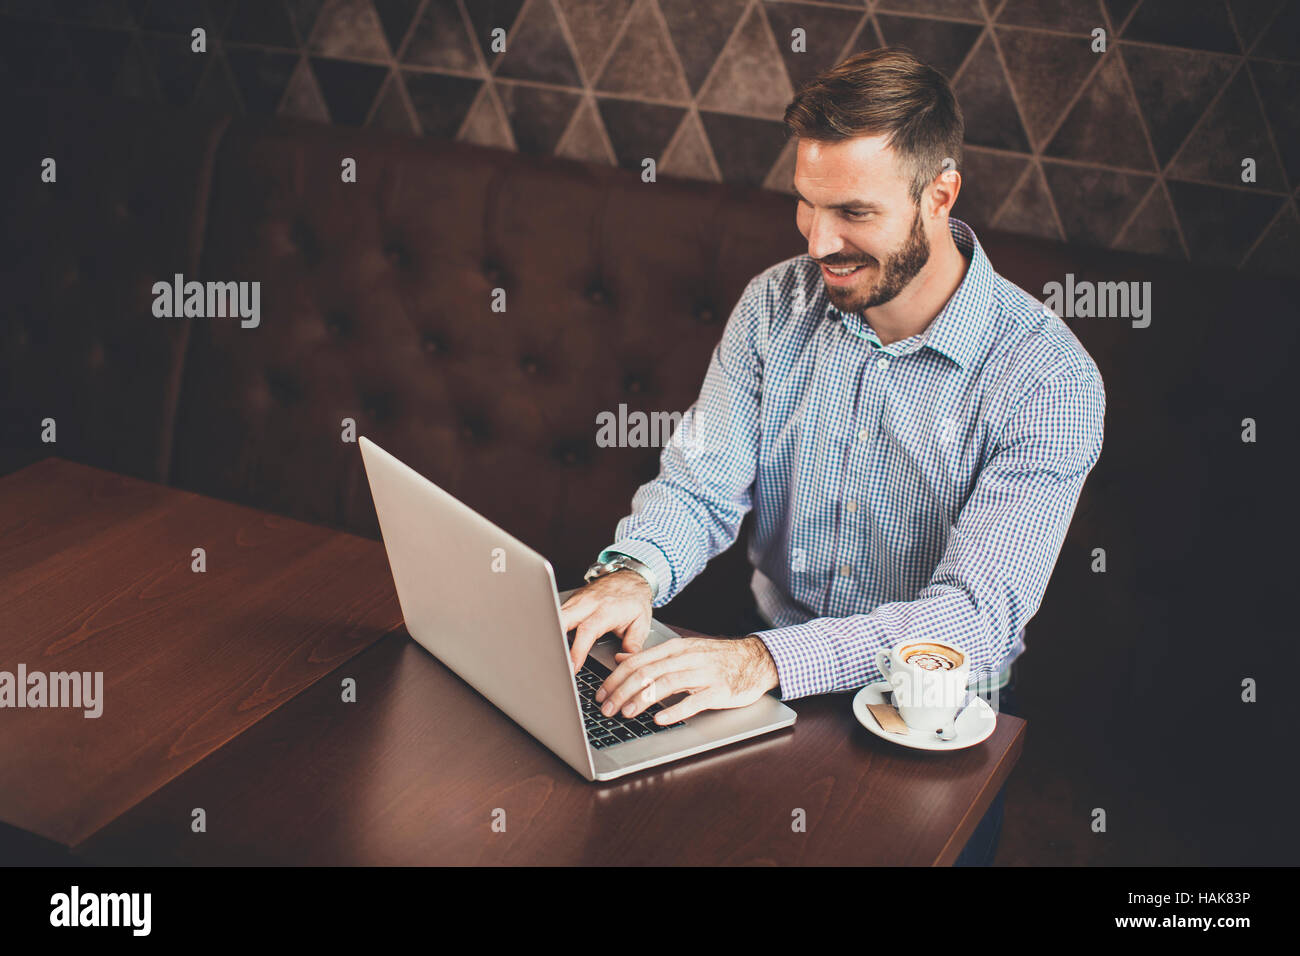 Young man sitting in cafe and using laptop Stock Photo